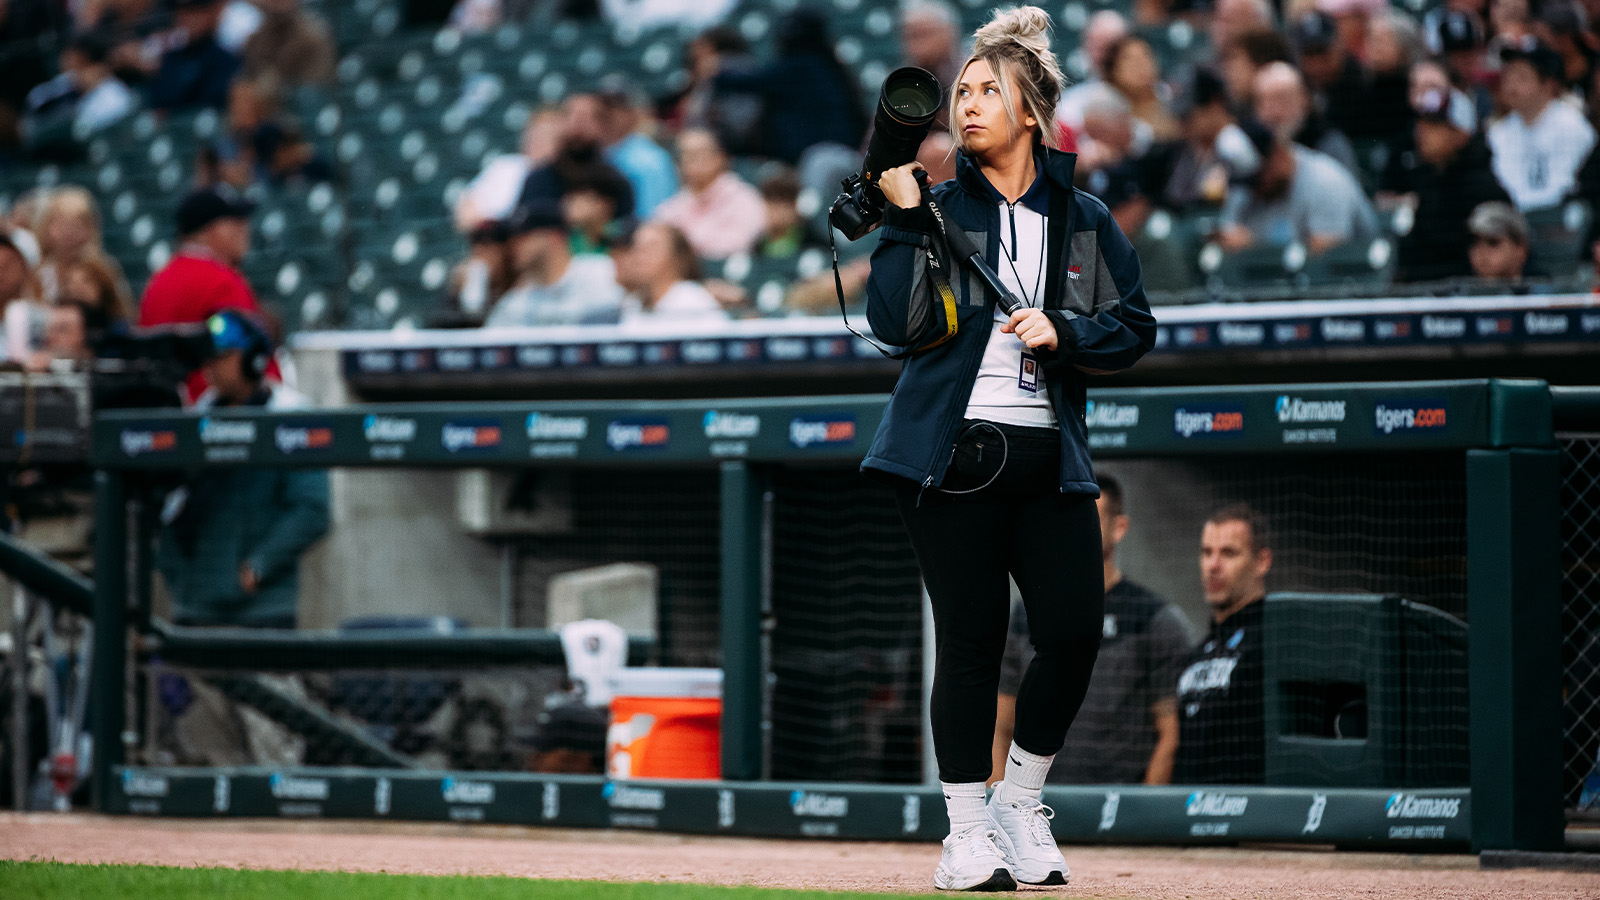 Woman with sandy brown hair wearing a jacket, white shirt, and black pants walks in front of a dugout while carrying a camera on a tripod.